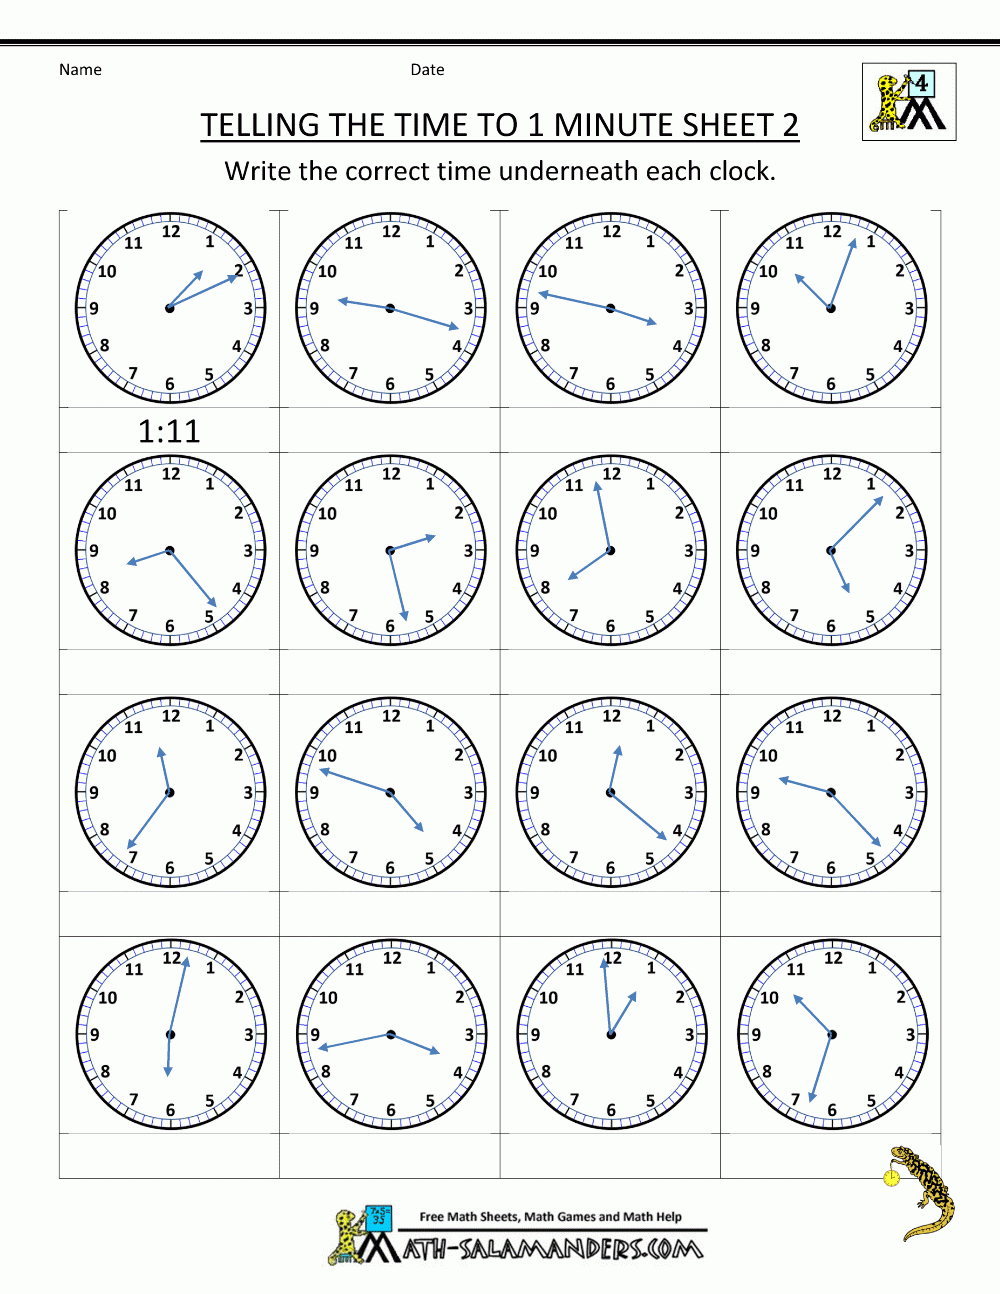 Free Time Worksheets Telling The Time To 1 Min 2 | Telling Time - Free Printable Time Worksheets For Kindergarten